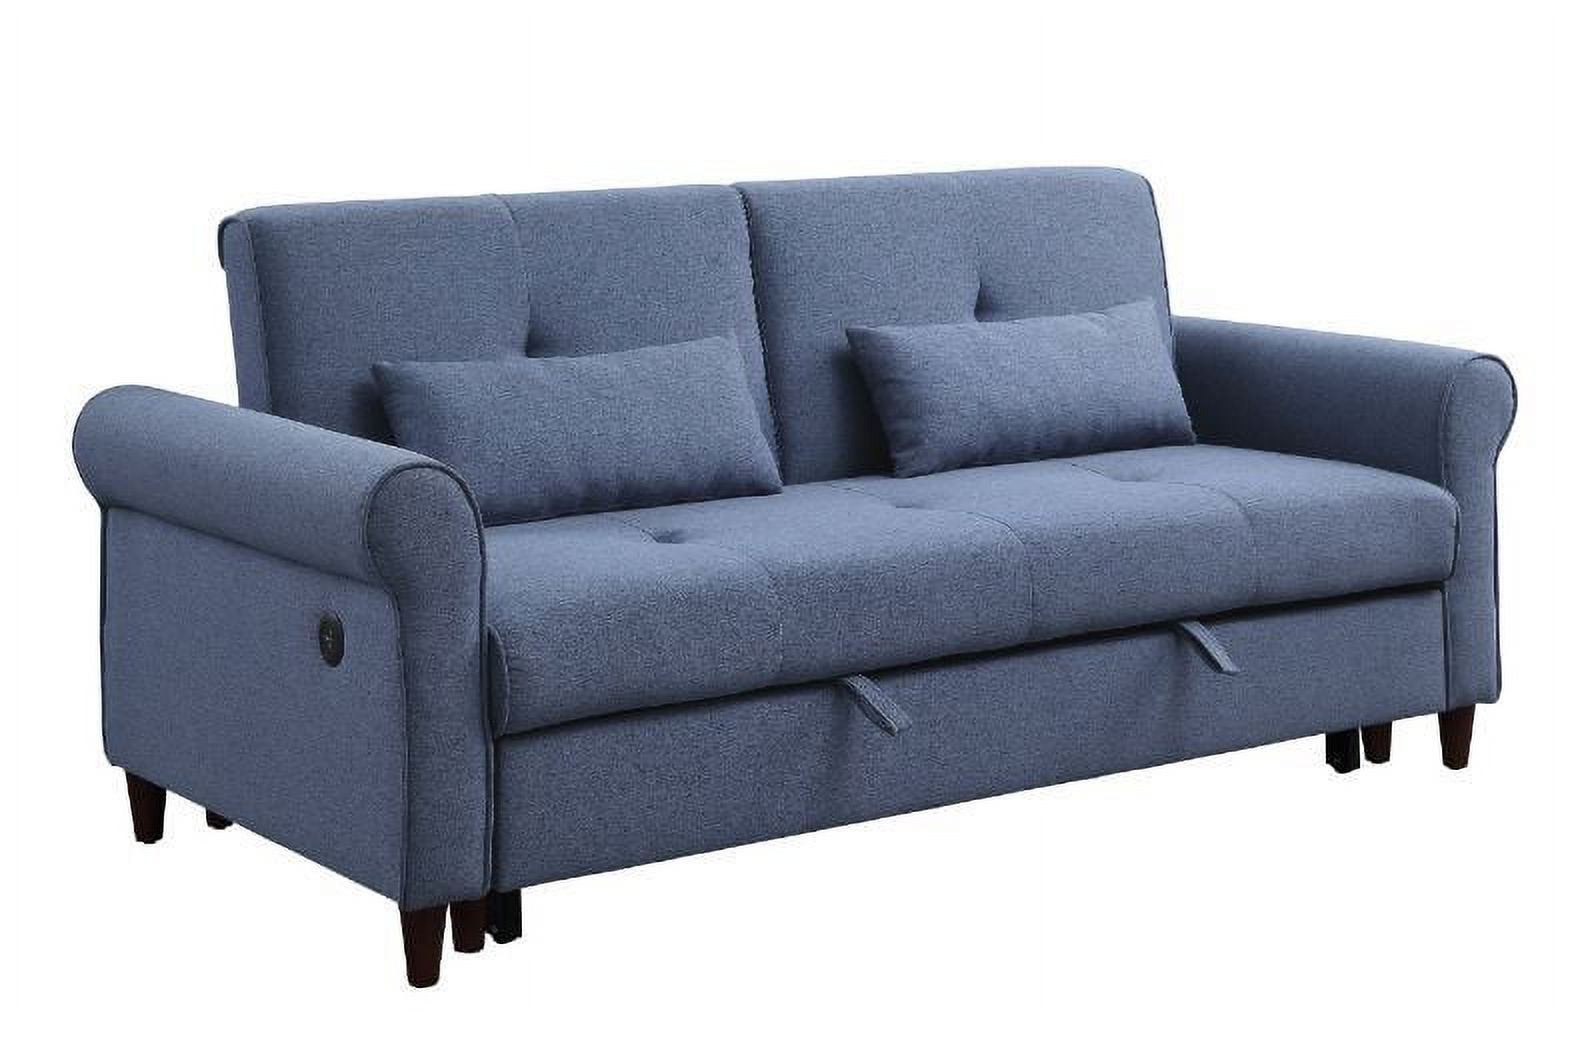 Blue Contemporary Living Room Furniture Pull-out Sleeper Sofa Built in USB Port - image 2 of 3